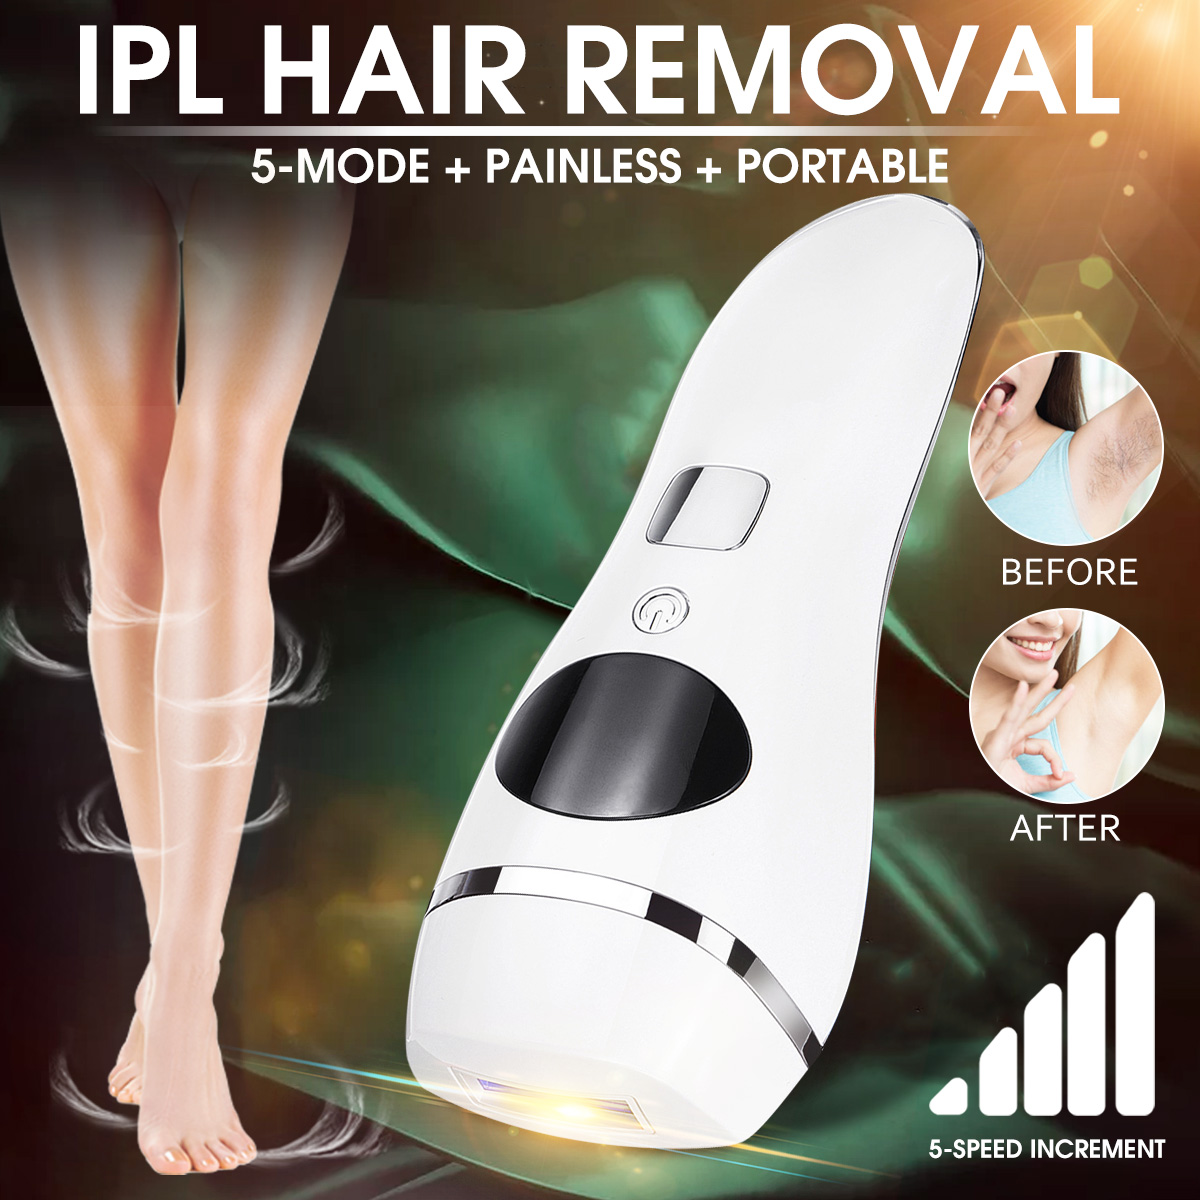 5 Gear Painless Permanent Epilator Permanent Hair Removal Machine Facial Epilator Remover Laser Hair Removal Instrument  